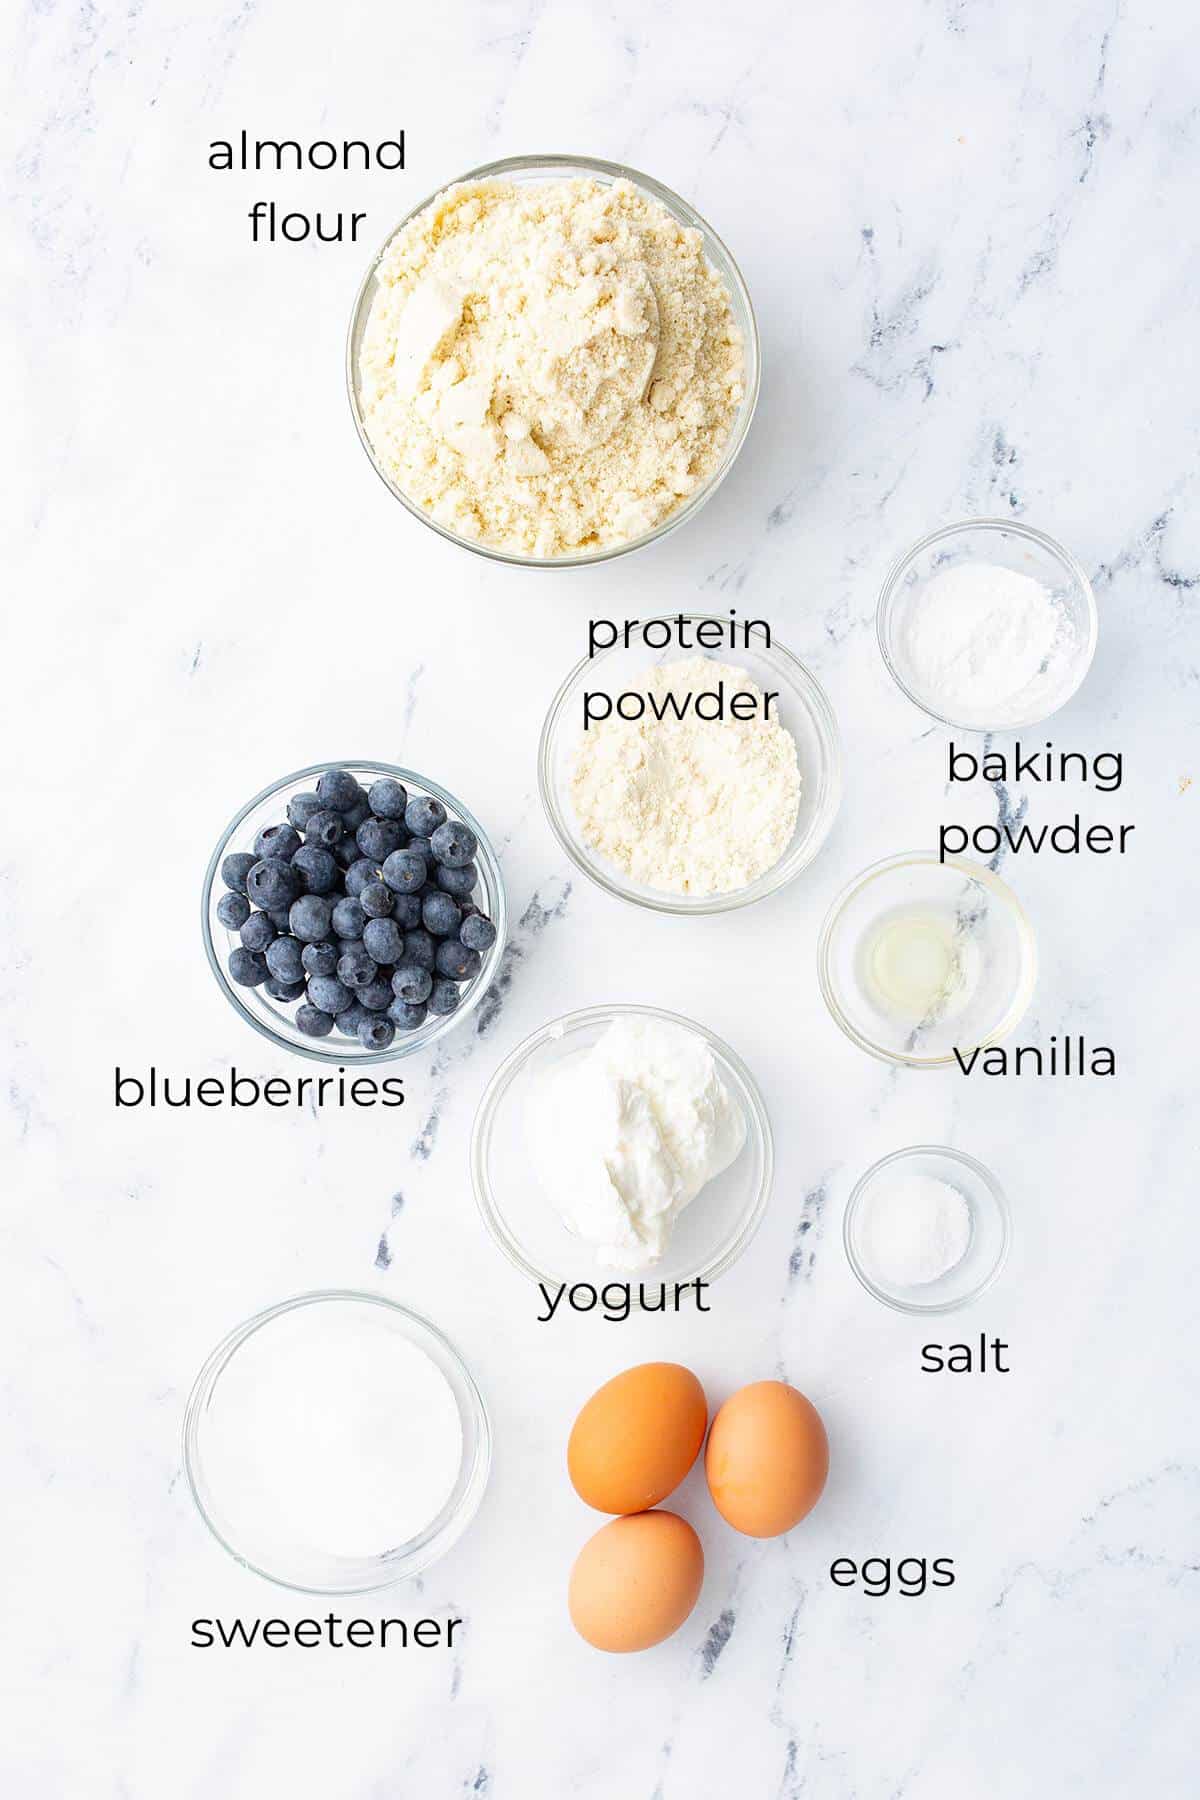 Top down image of the ingredients needed for Keto Blueberry Muffins.